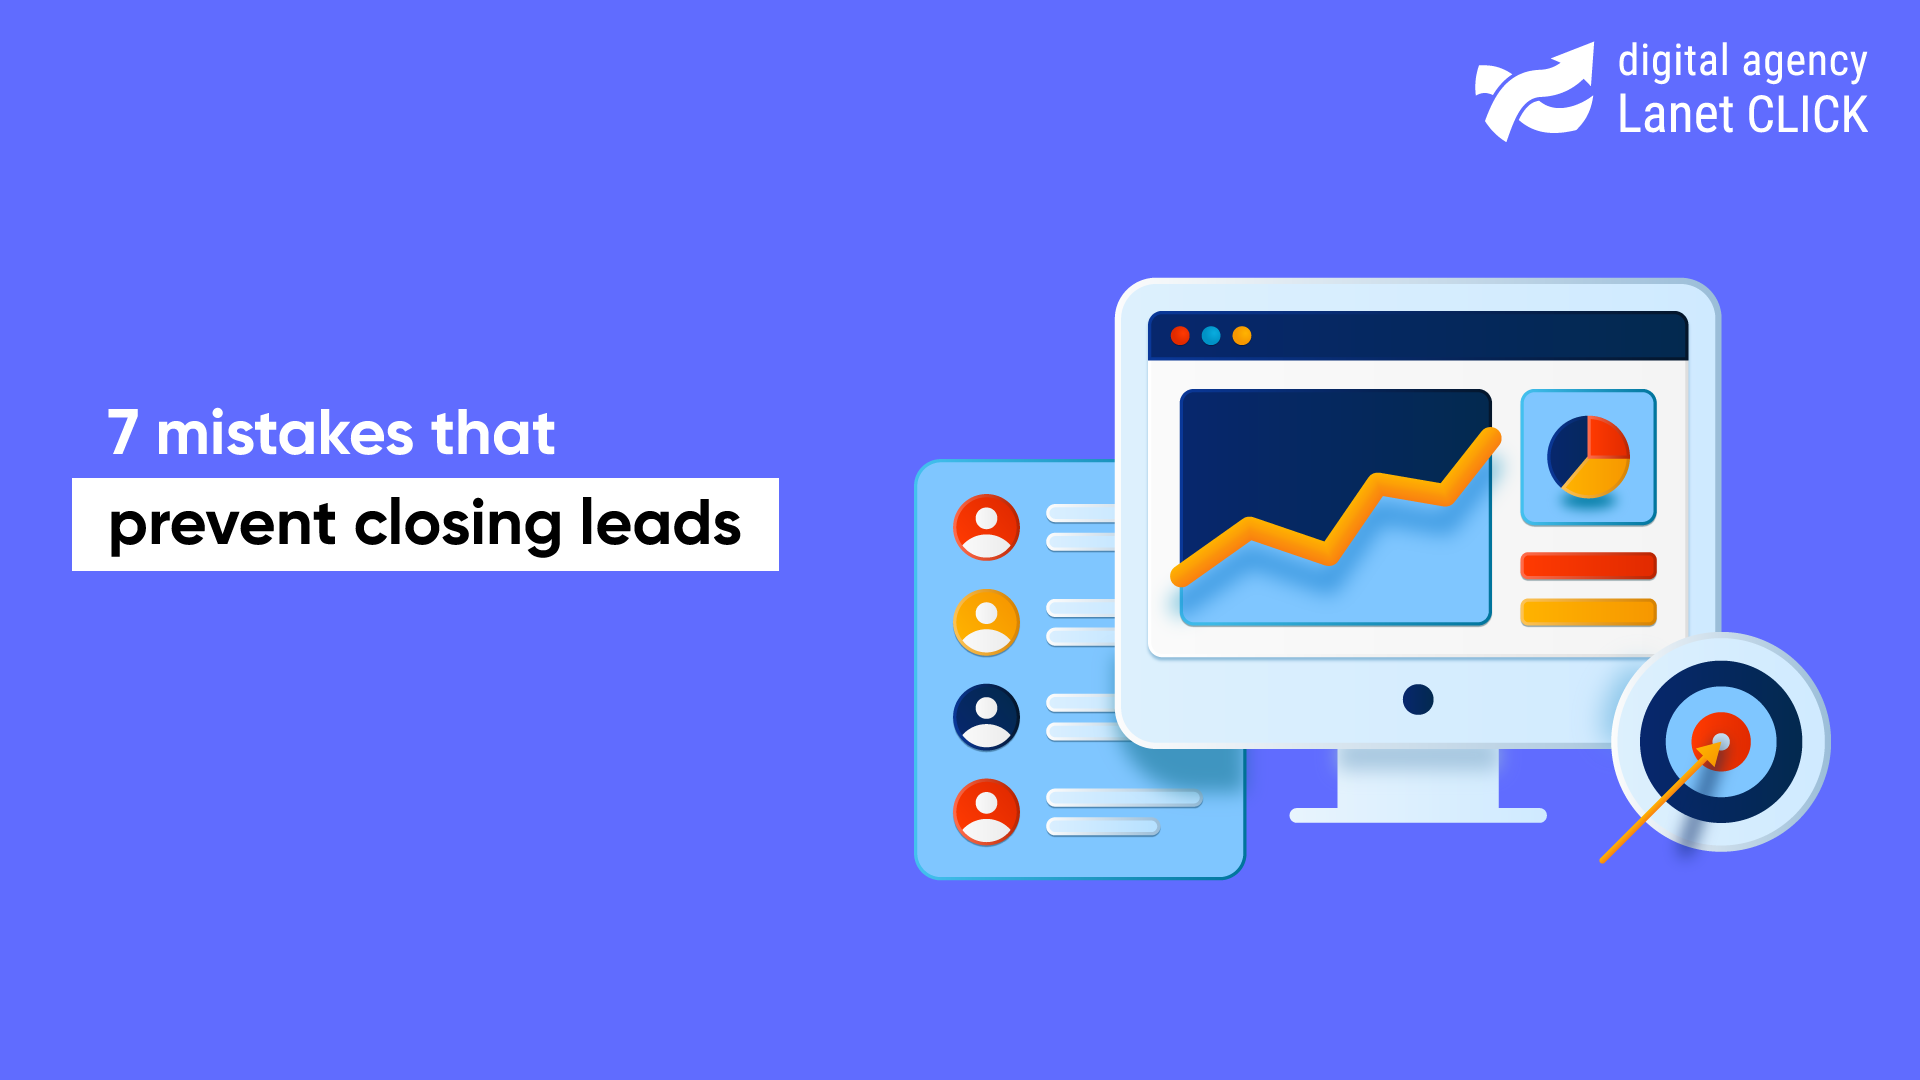 7 mistakes that prevent closing leads